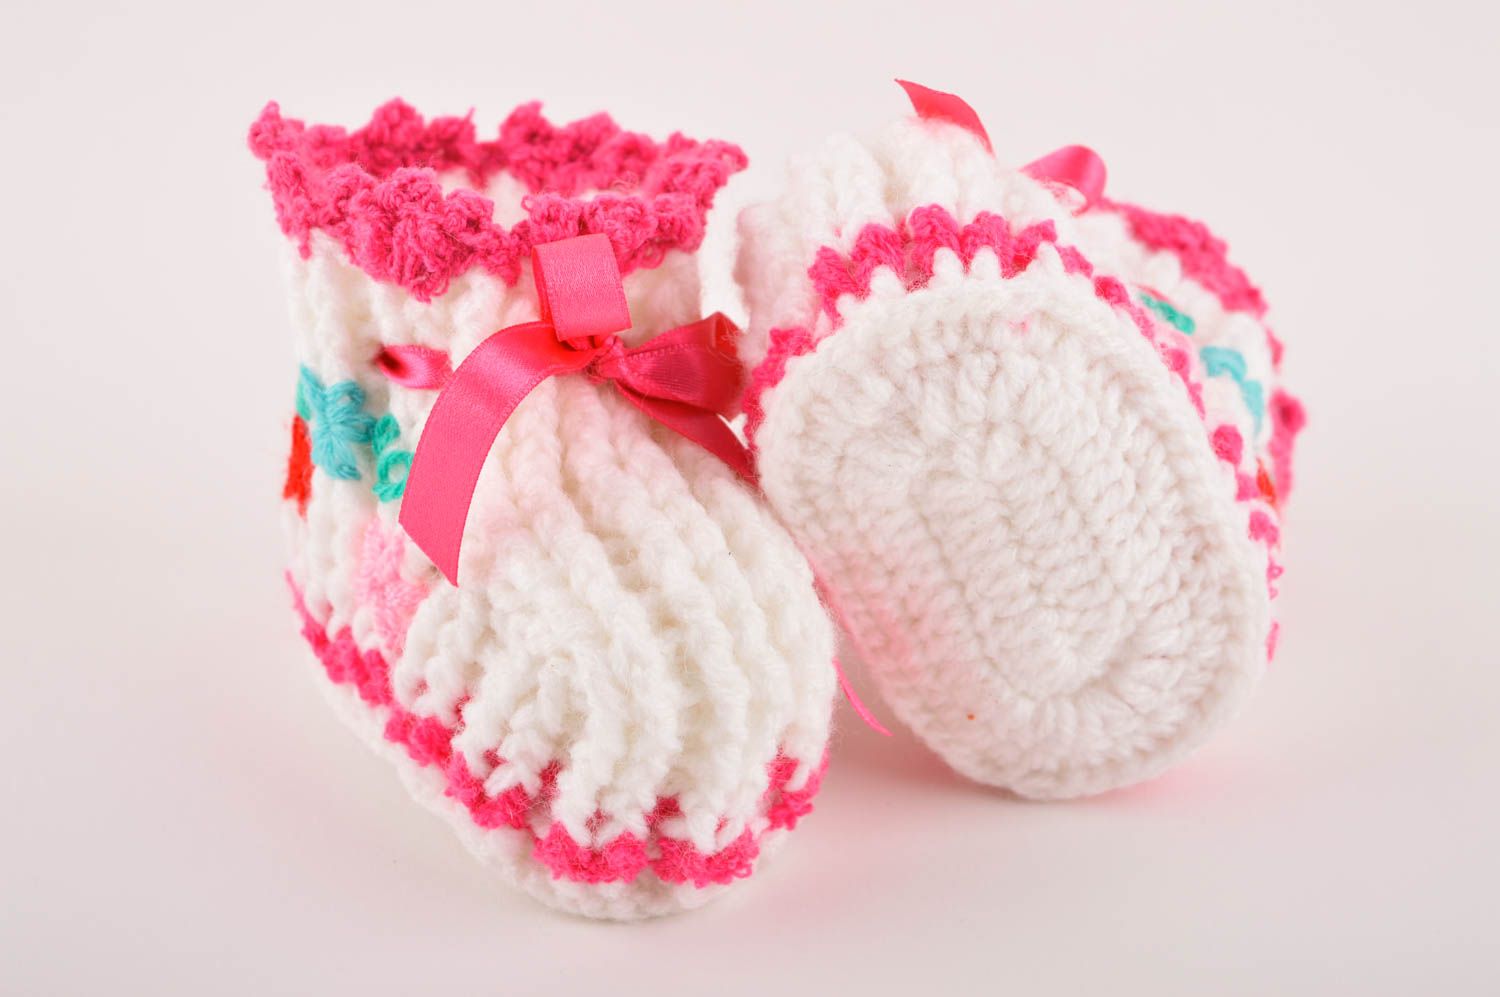 Homemade baby shoes baby booties crochet accessories goods for kids baby socks photo 3